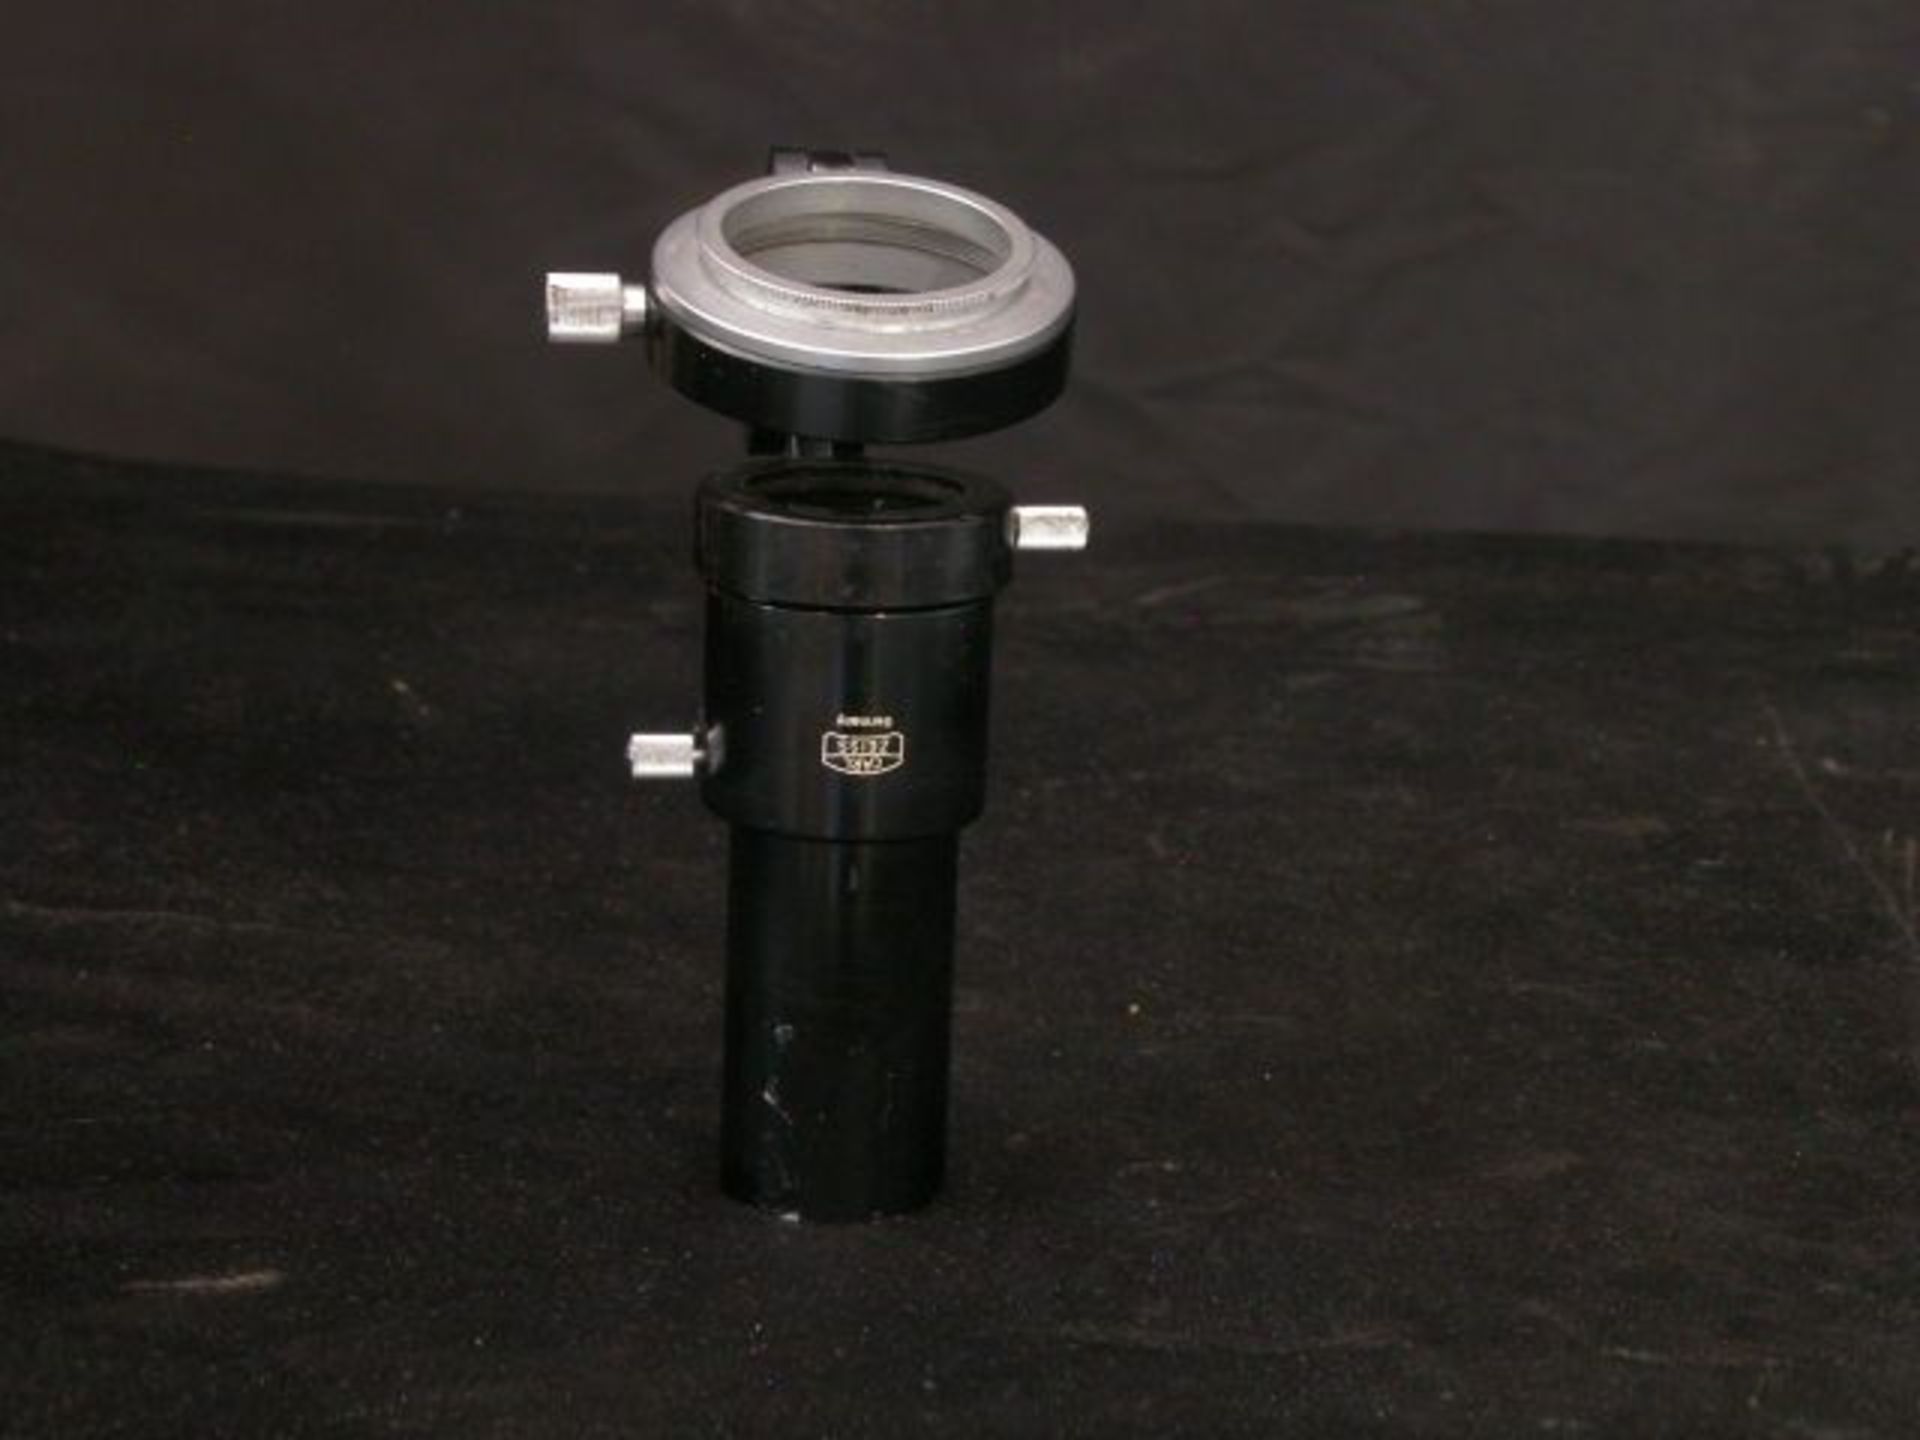 Carl Zeiss Lens Fliter Holder With Articulating Arm, Qty 1, 330947532263 - Image 2 of 3